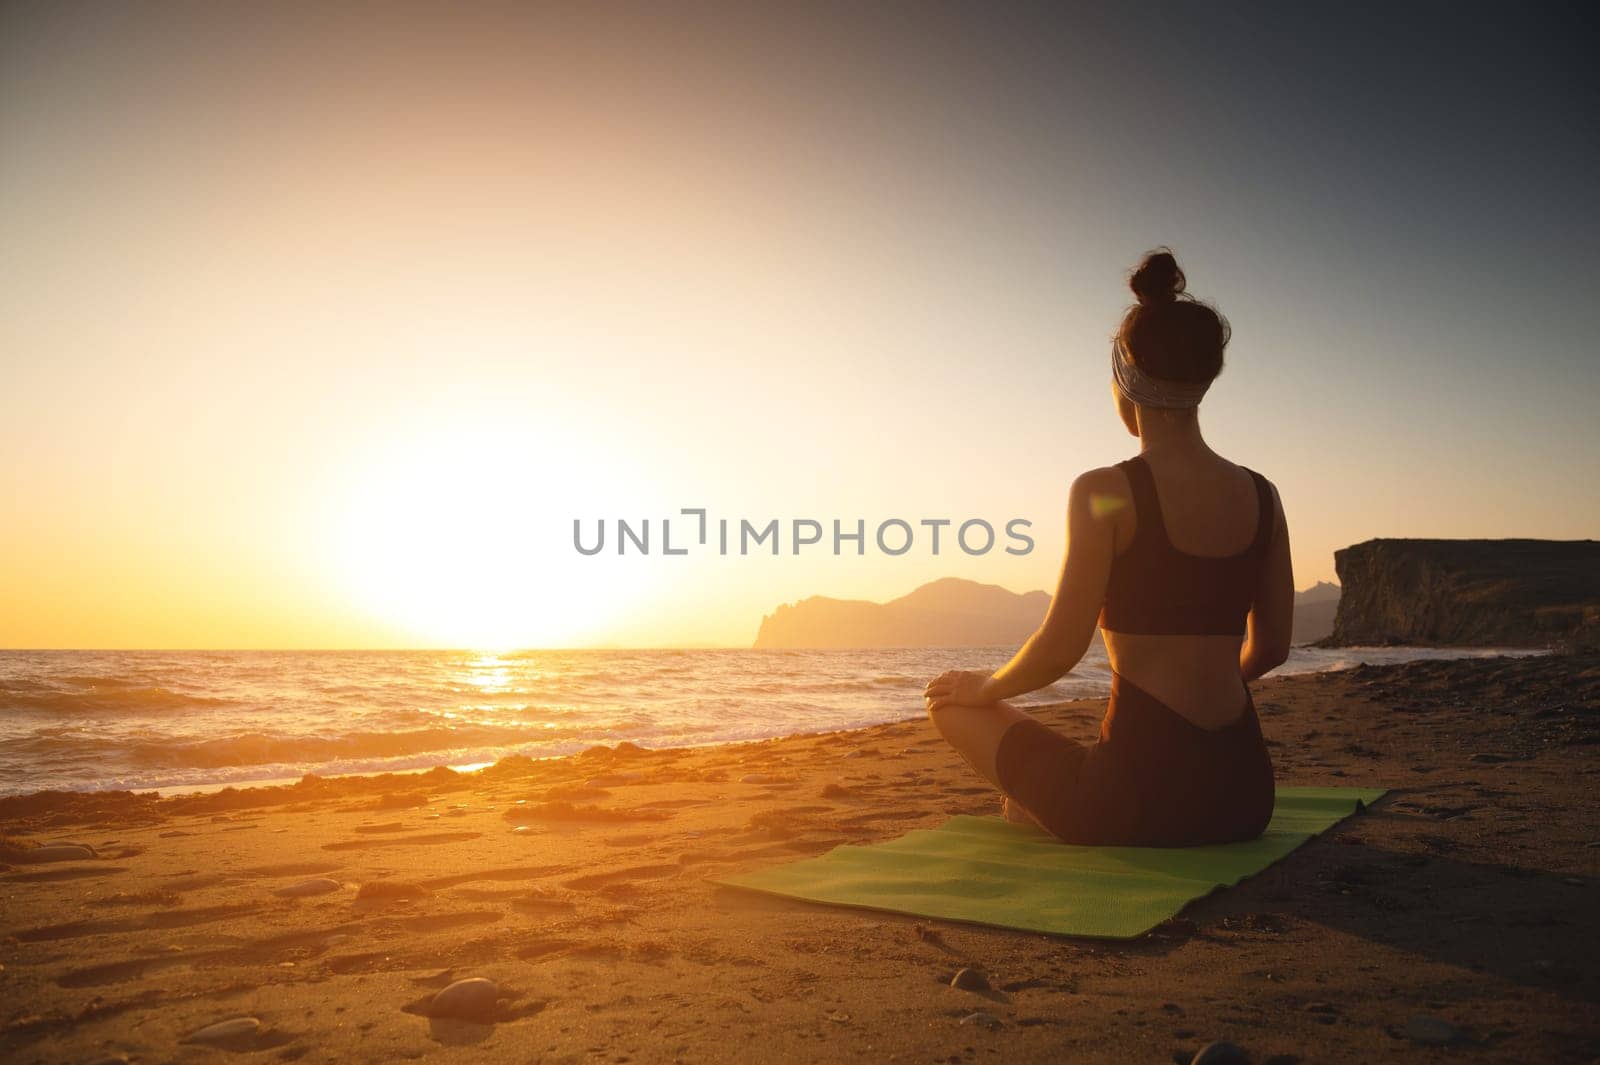 Yoga woman meditating at serene sunset or sunrise on the beach. The girl relaxes in the lotus position. Fingers folded in mudras